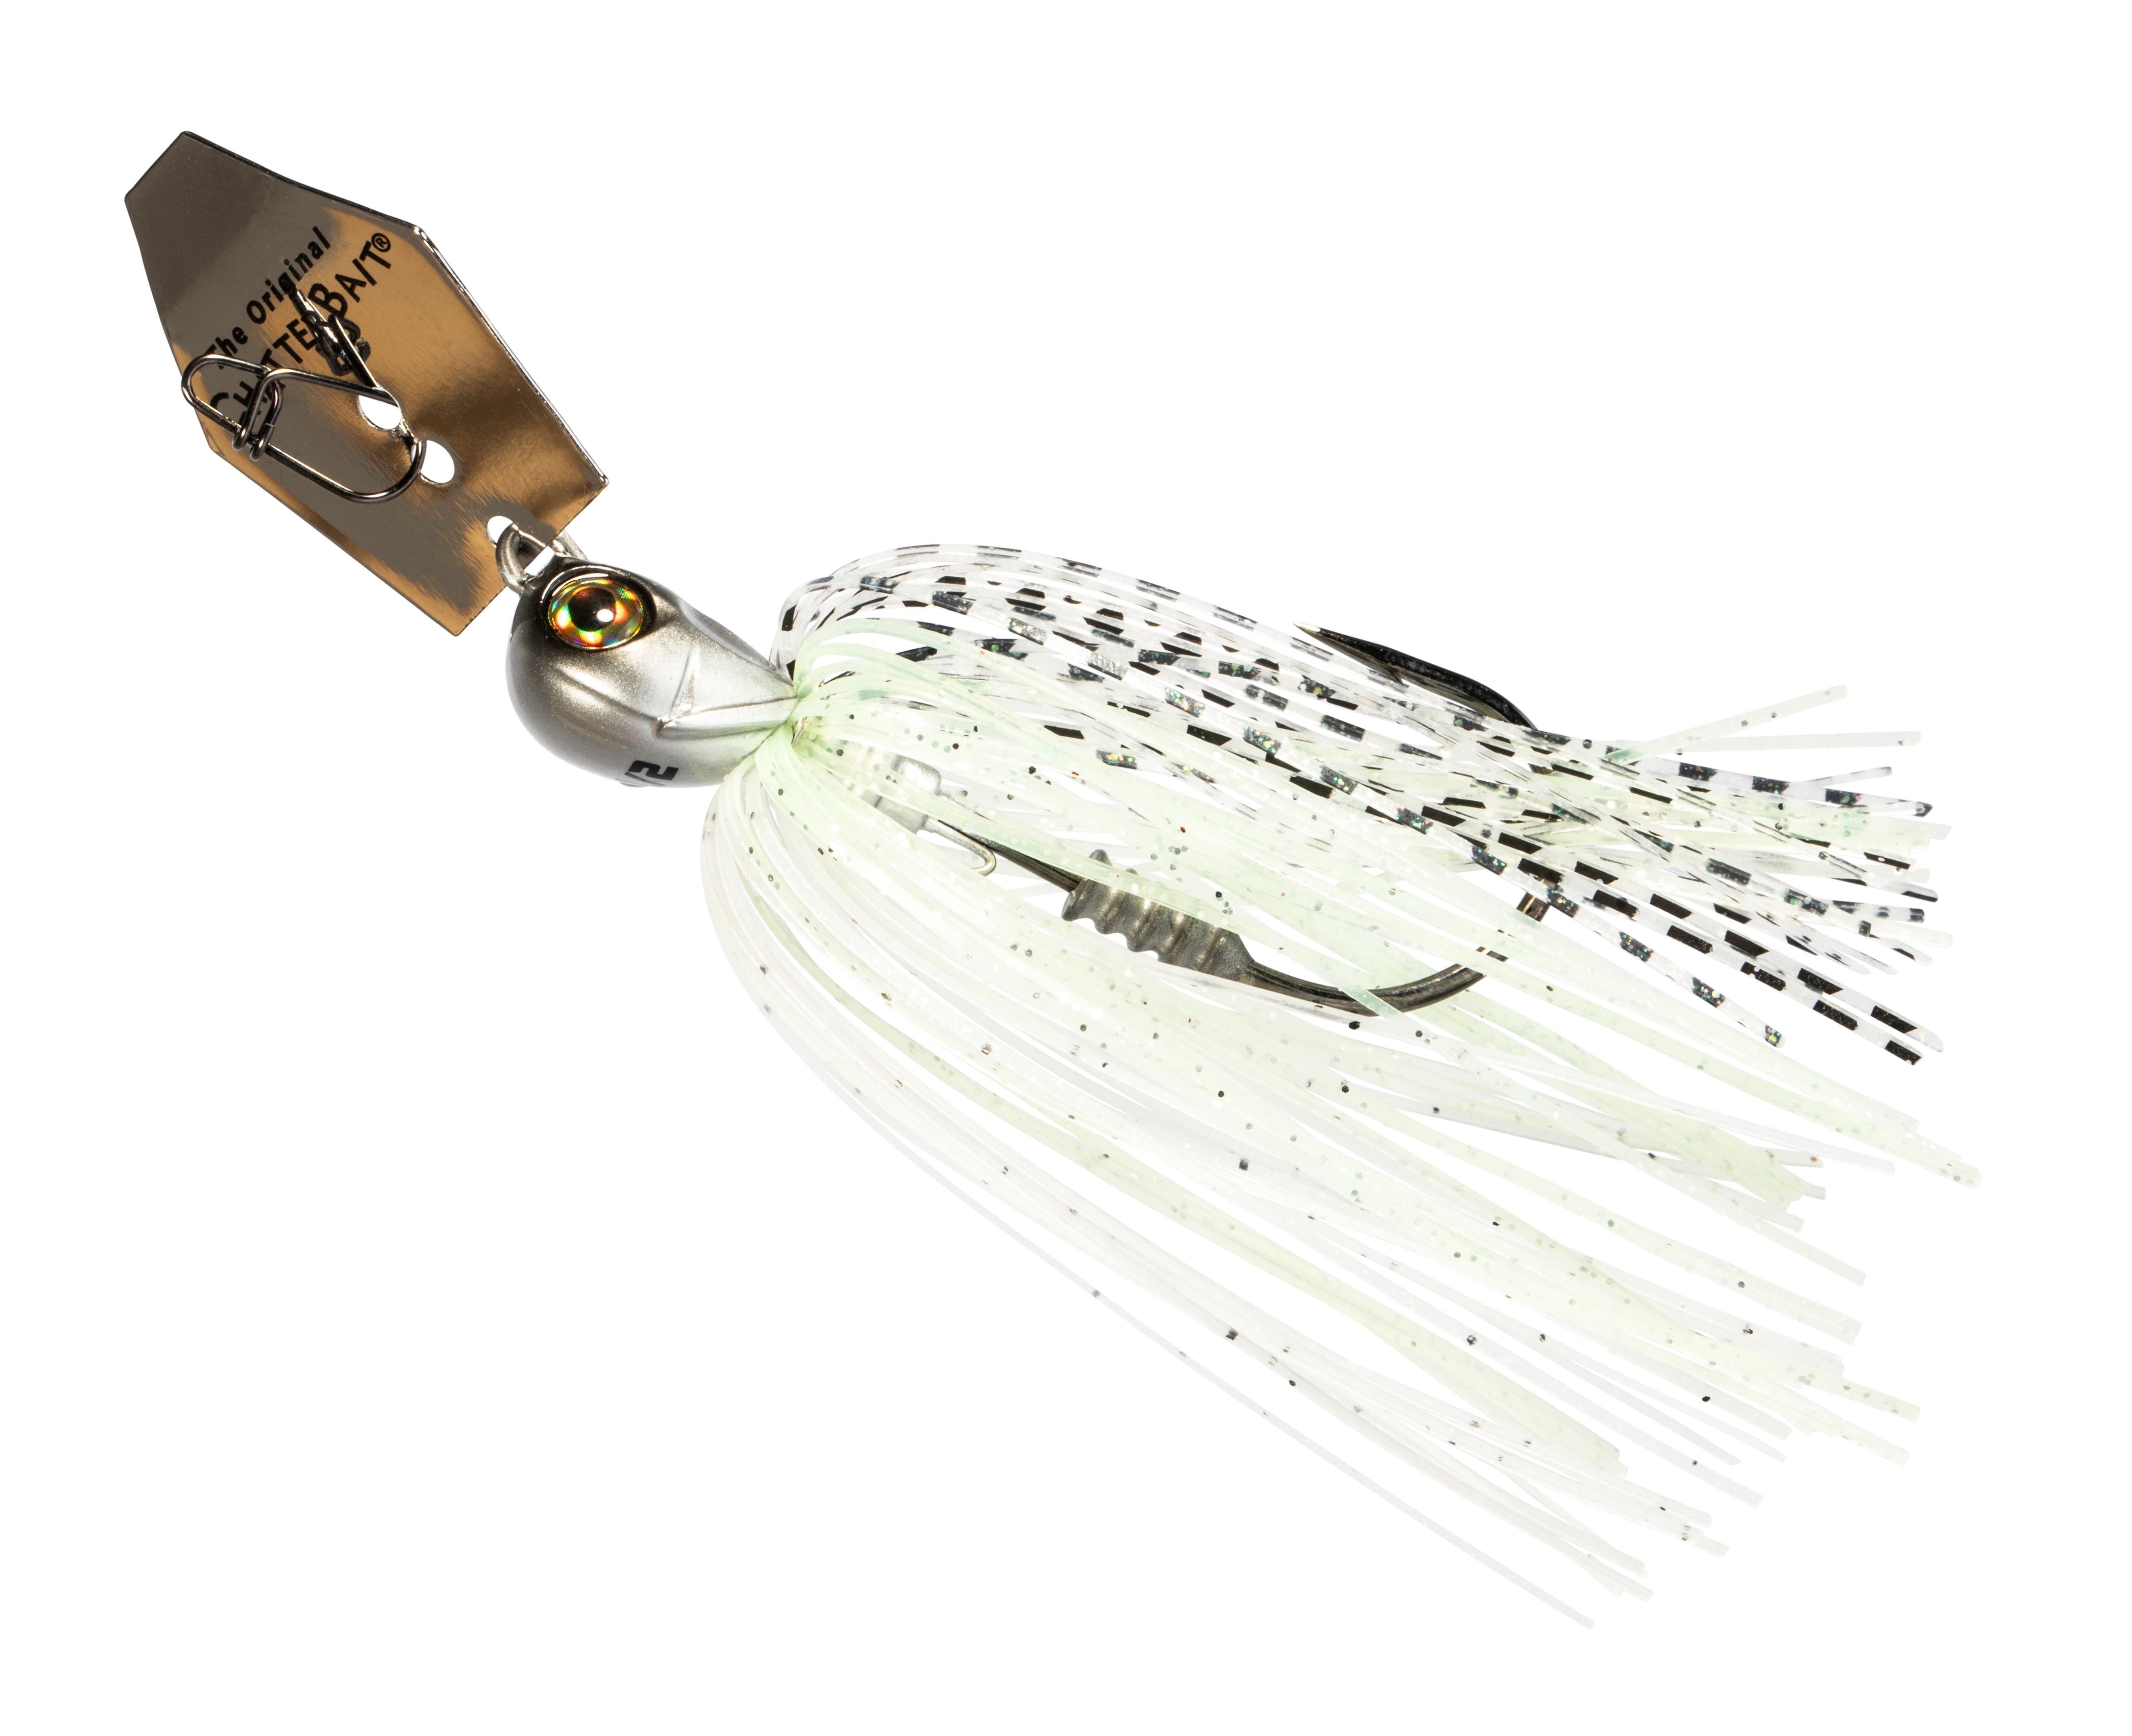 Z-Man Fishing Products - Swimbait or Creature bait? What's your